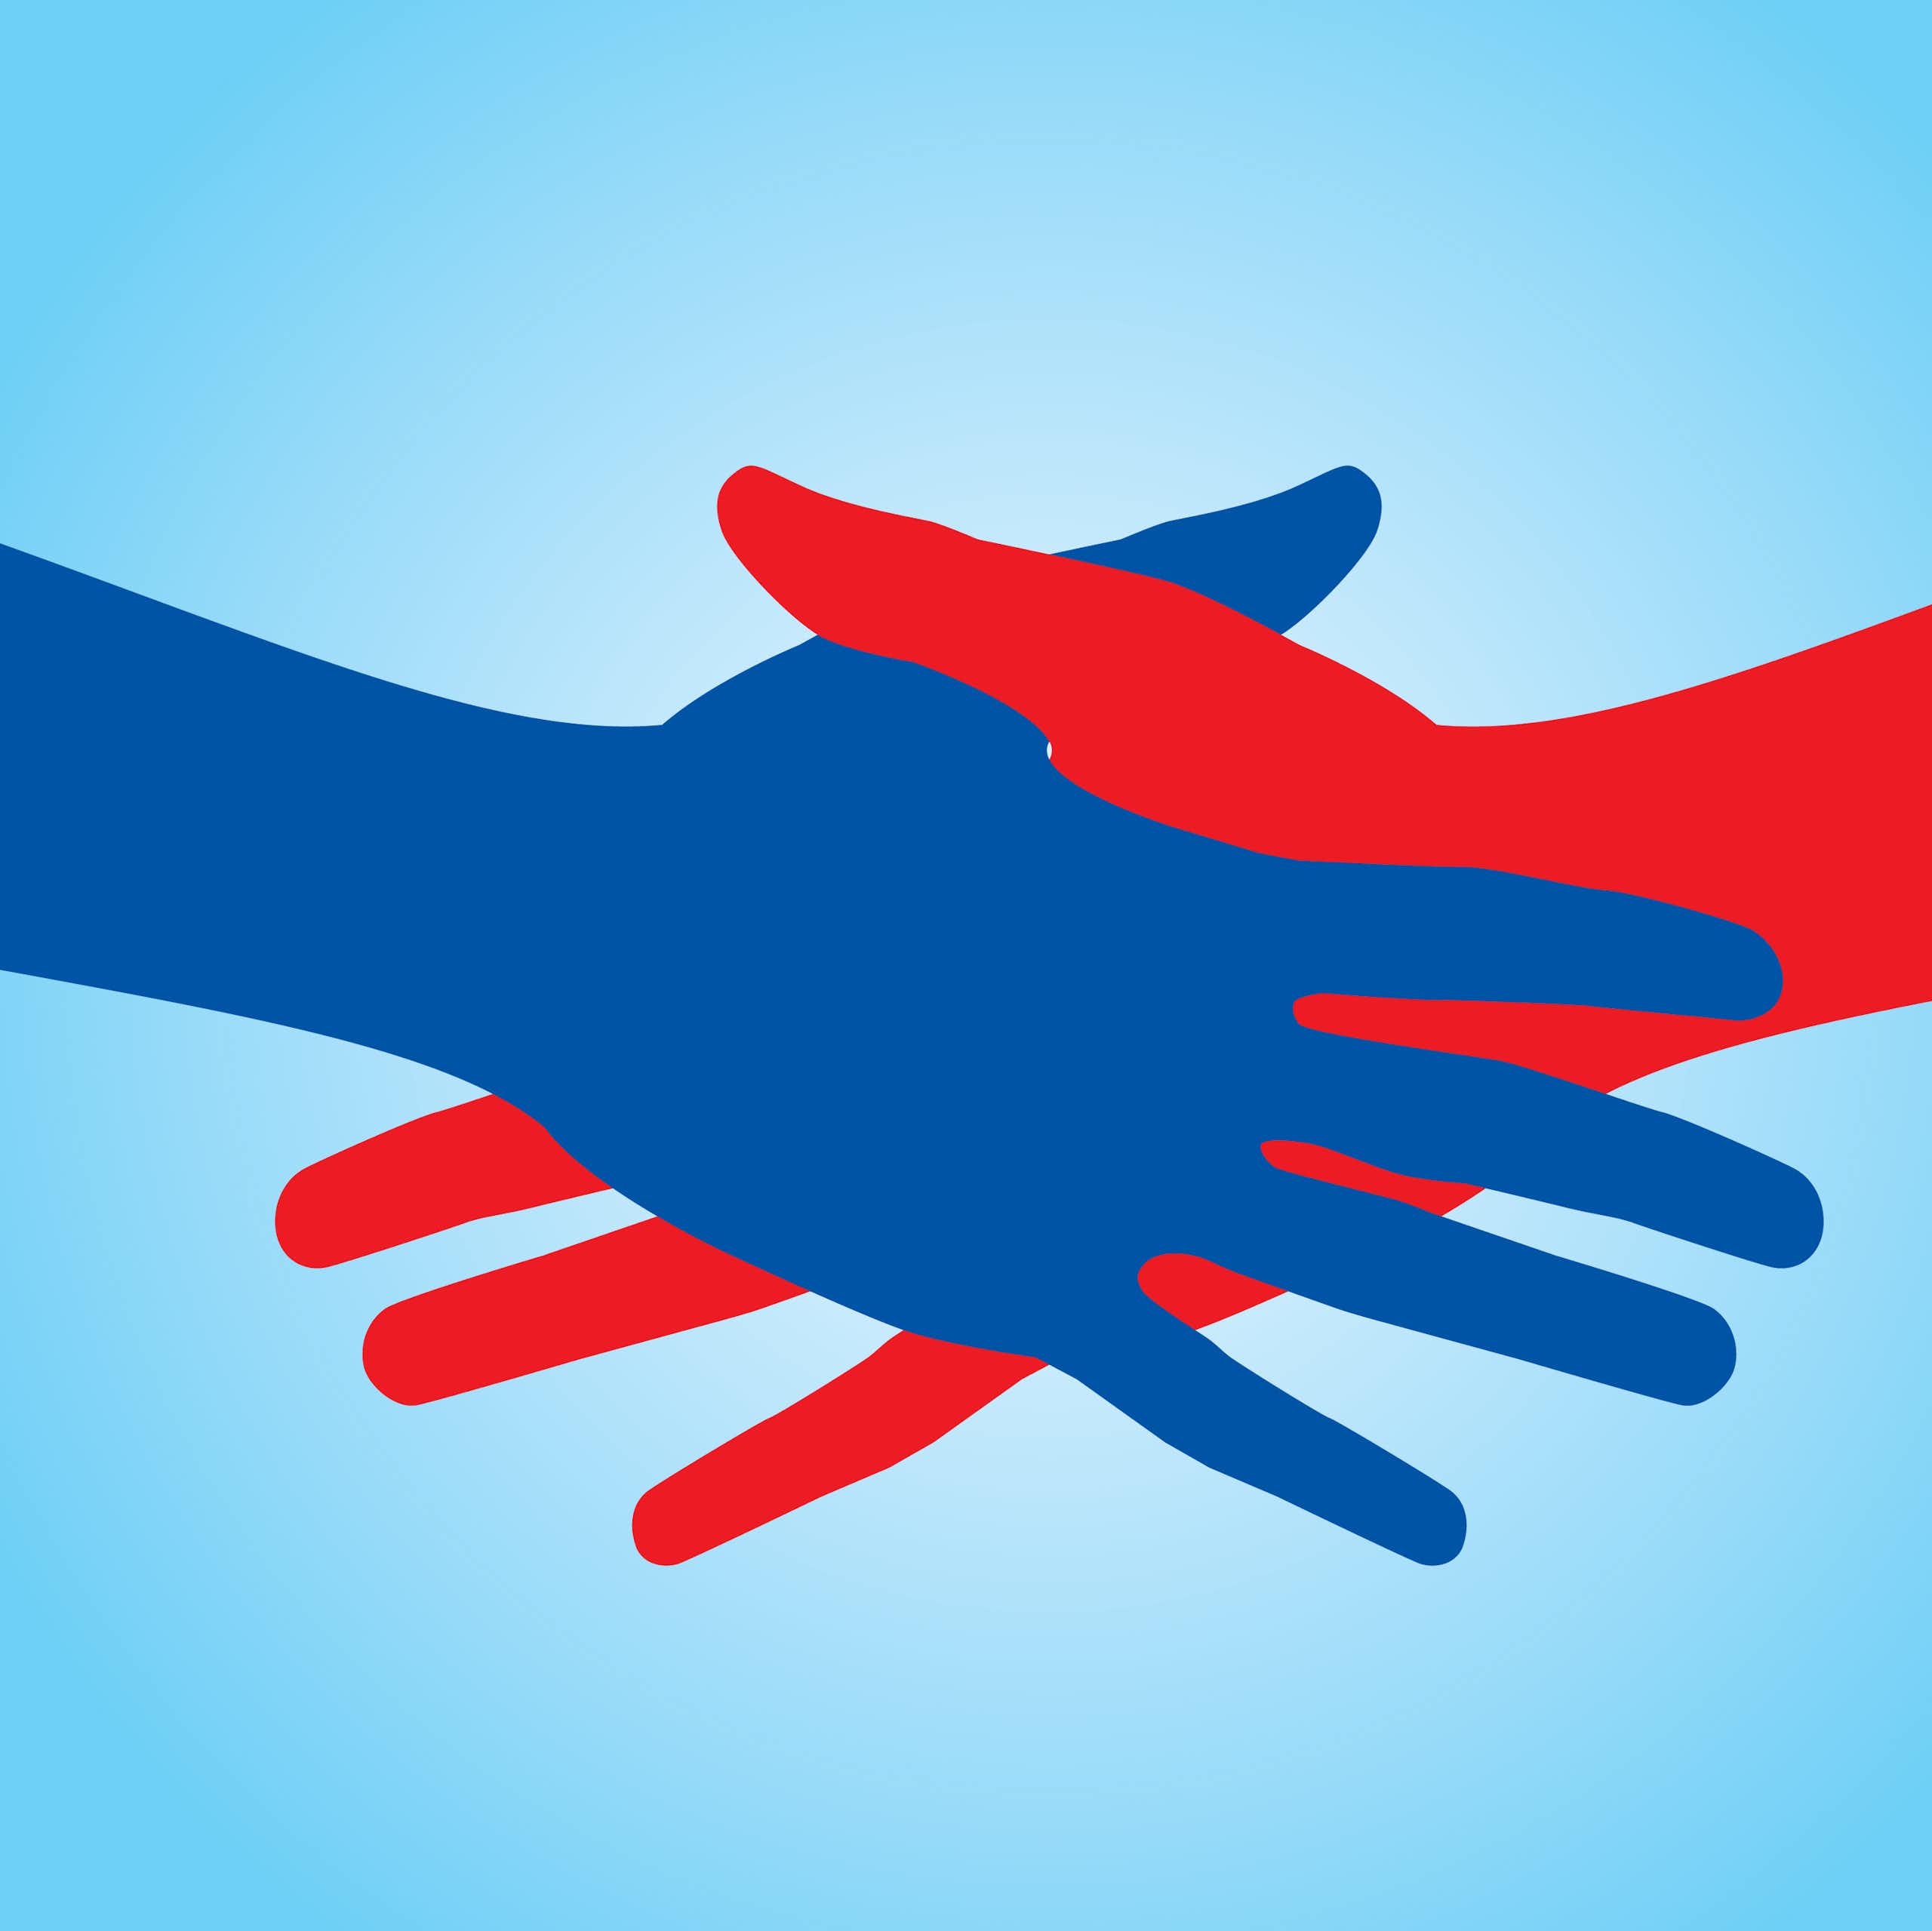 A red hand shaking a blue hand.